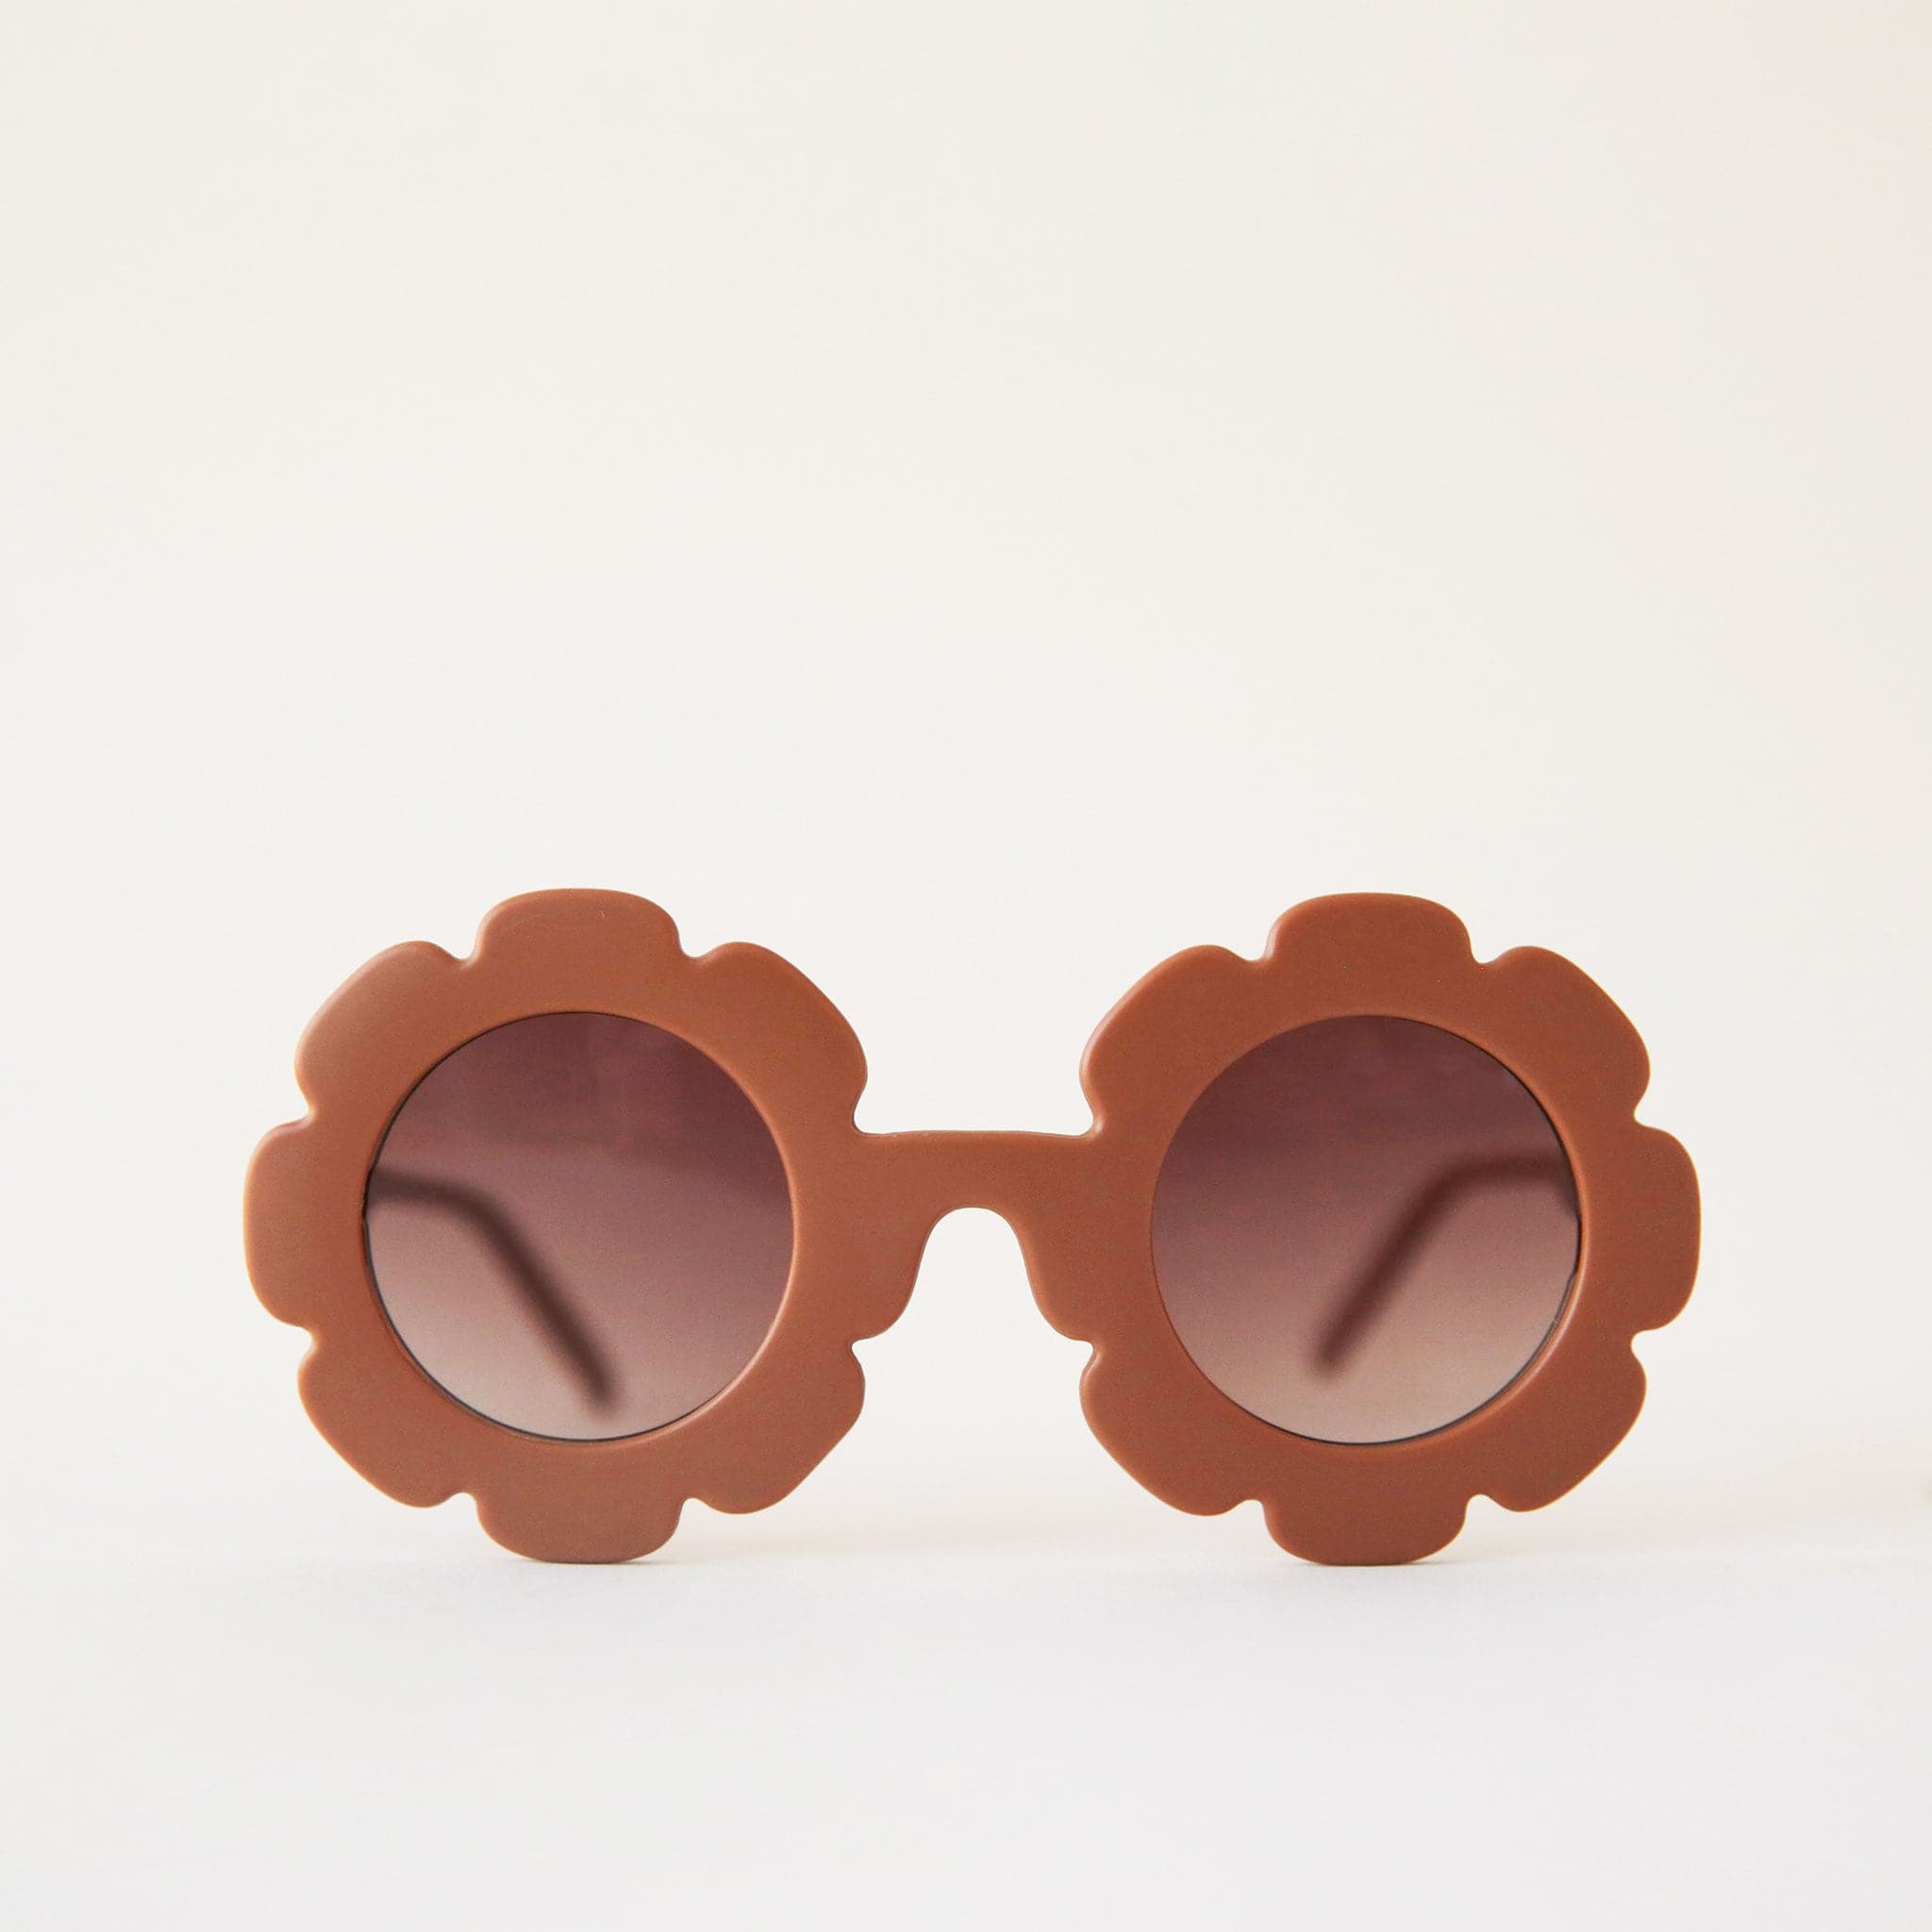 Cognac colored flower shaped sunnies for the little ones.